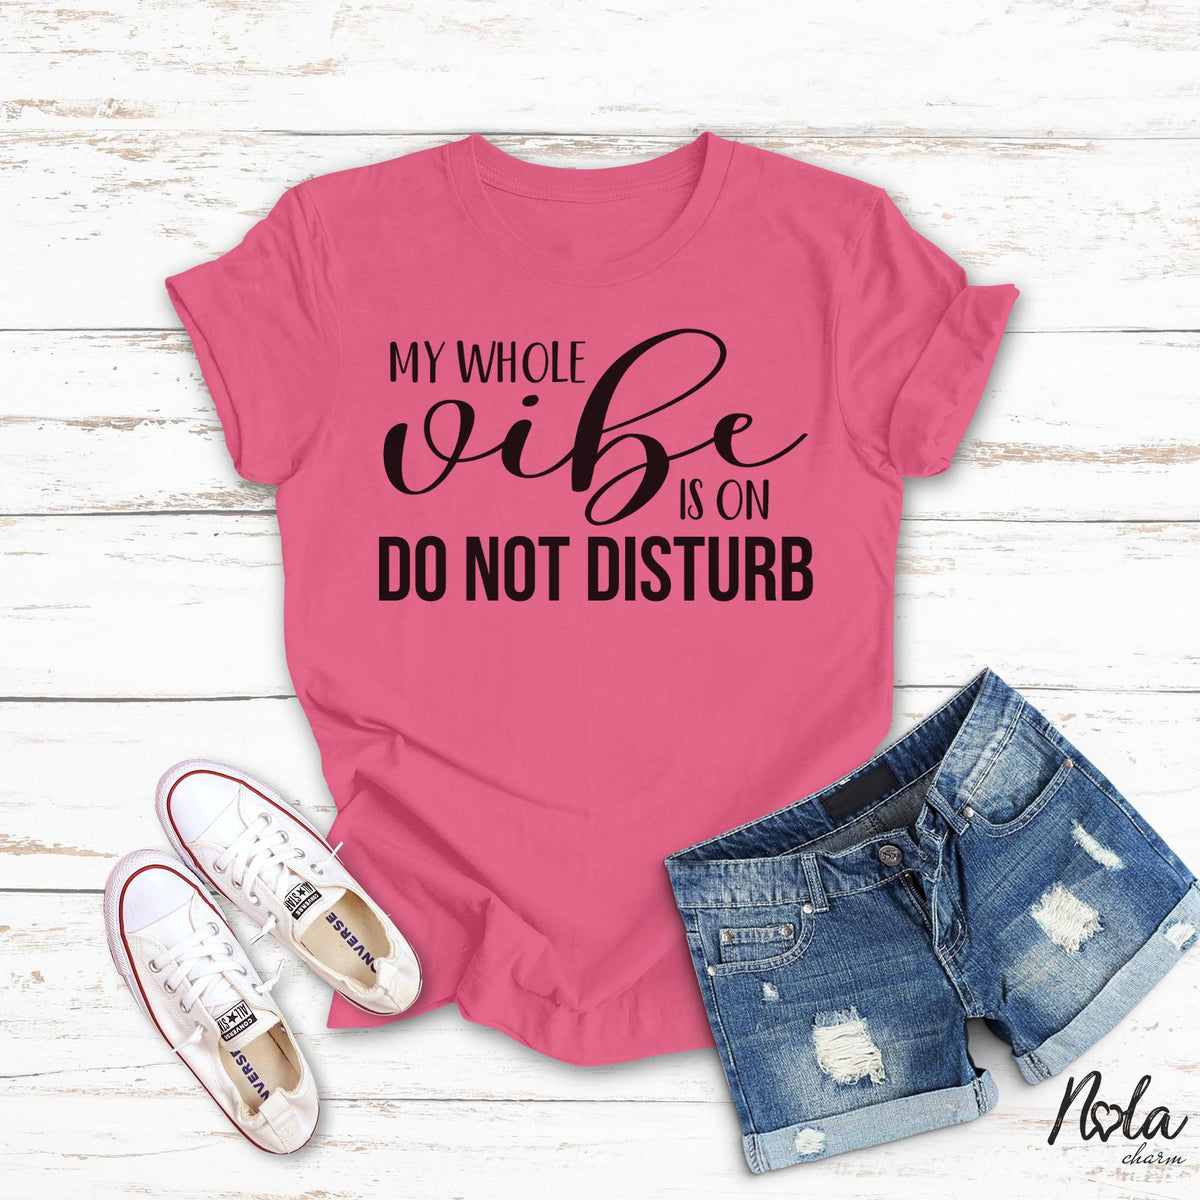 My Whole Vibe Is On Do Not Disturb - Nola Charm